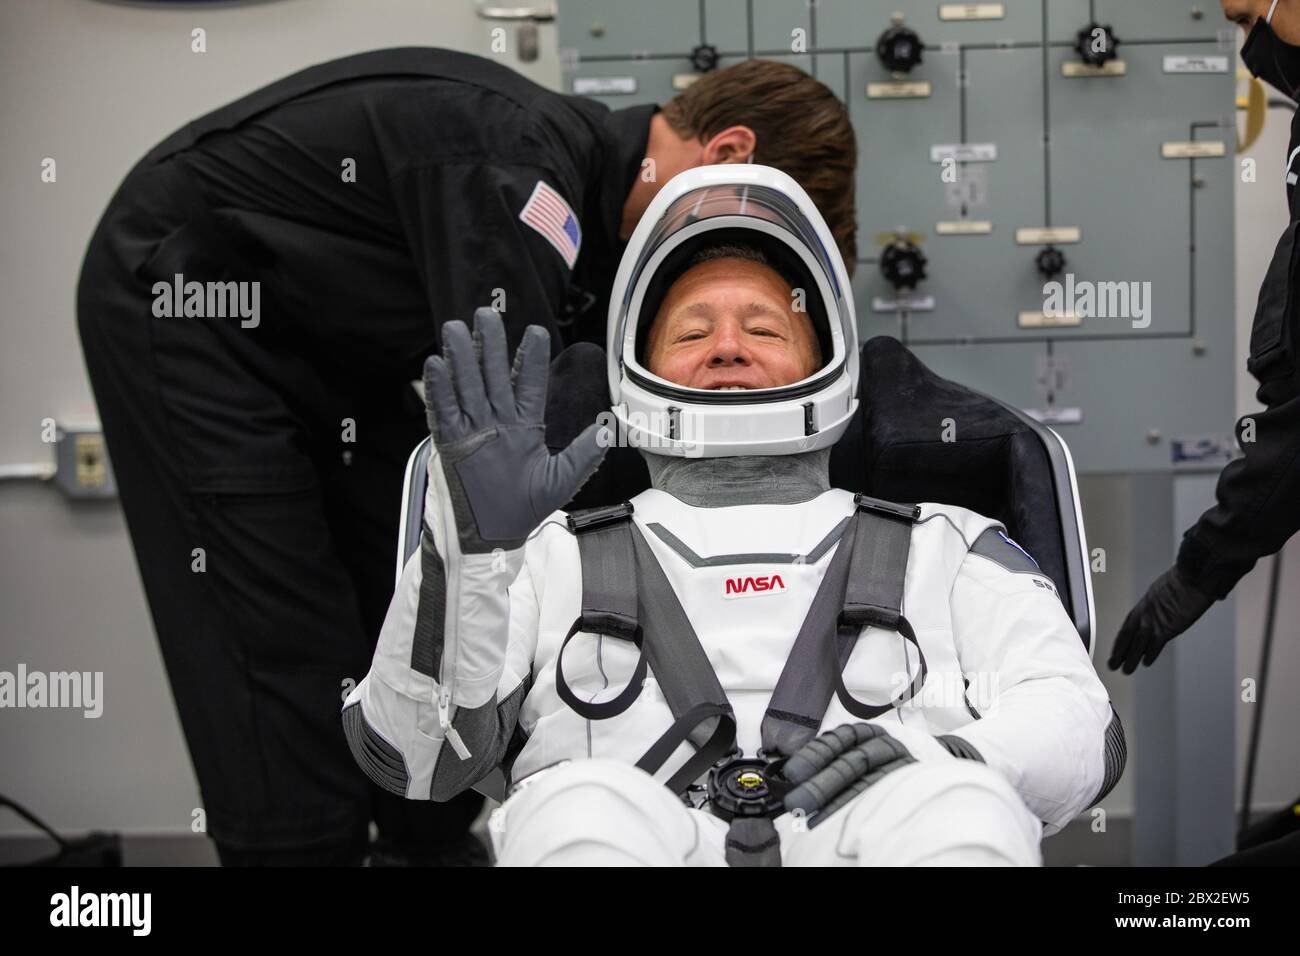 NASA astronaut Douglas Hurley, smiles as he suits-up in his SpaceX spacesuit, in the ready room of the Neil Armstrong Operations and Checkout Building at the Kennedy Space Center May 30, 2020 Cape Canaveral, in Florida. The astronauts Behnken and Hurley will make a second attempt at launch in the first commercial launch carrying astronauts to the International Space Station. Stock Photo